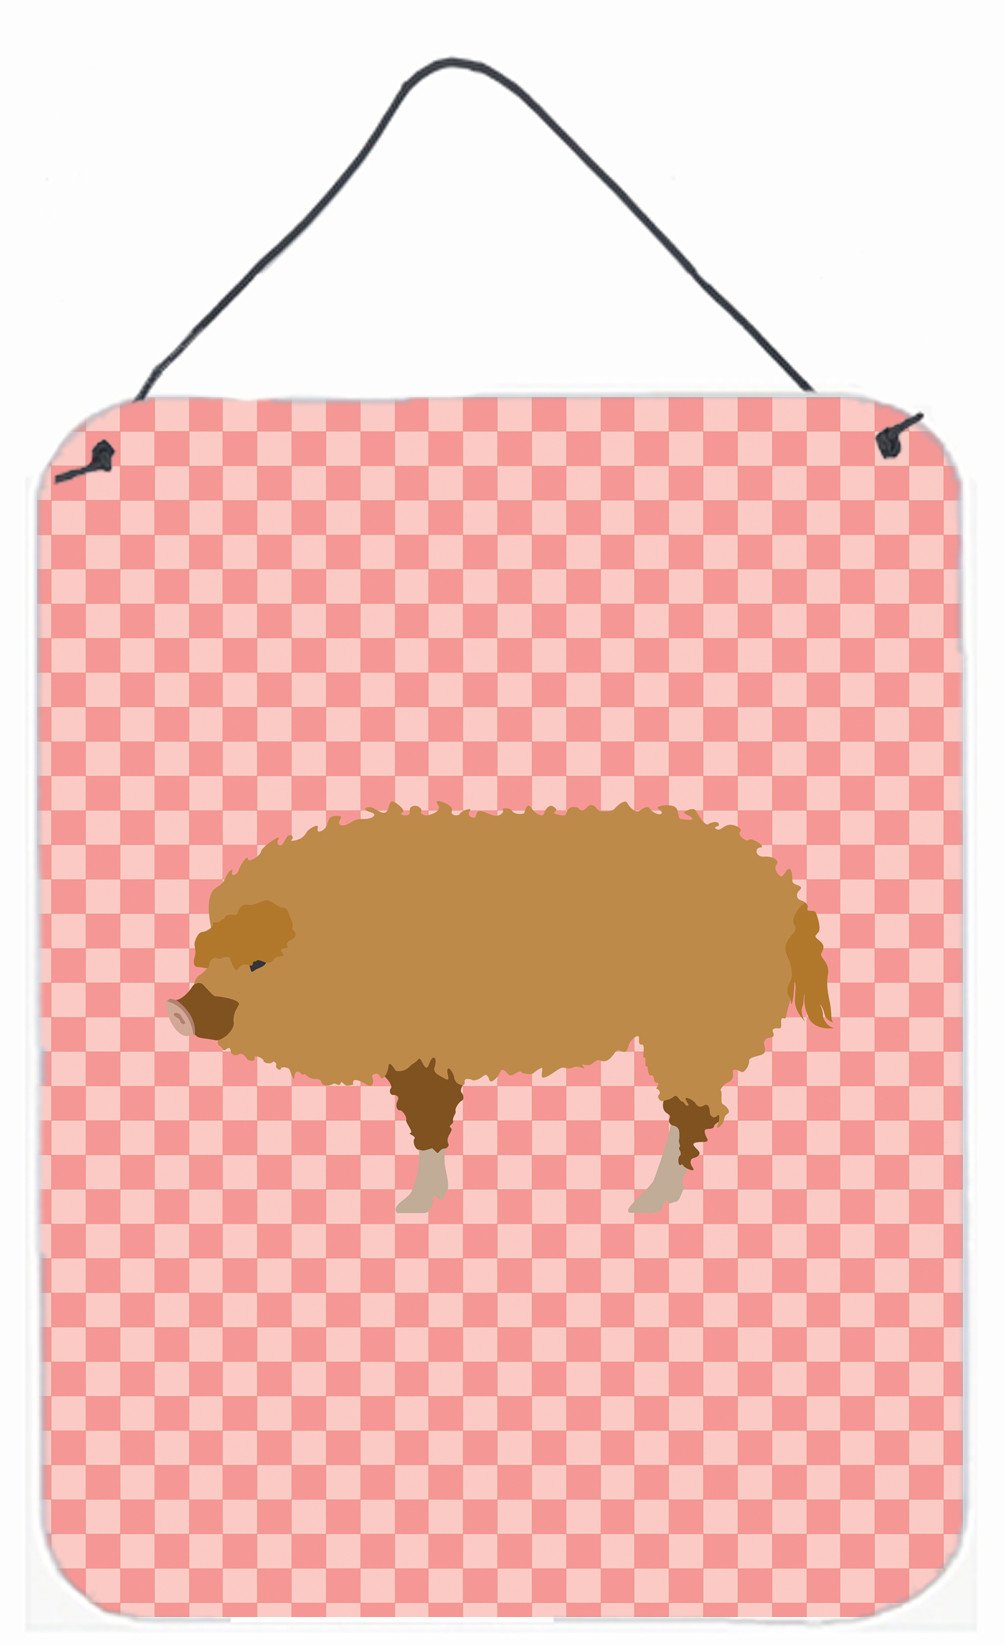 Hungarian Mangalica Pig Pink Check Wall or Door Hanging Prints BB7934DS1216 by Caroline's Treasures